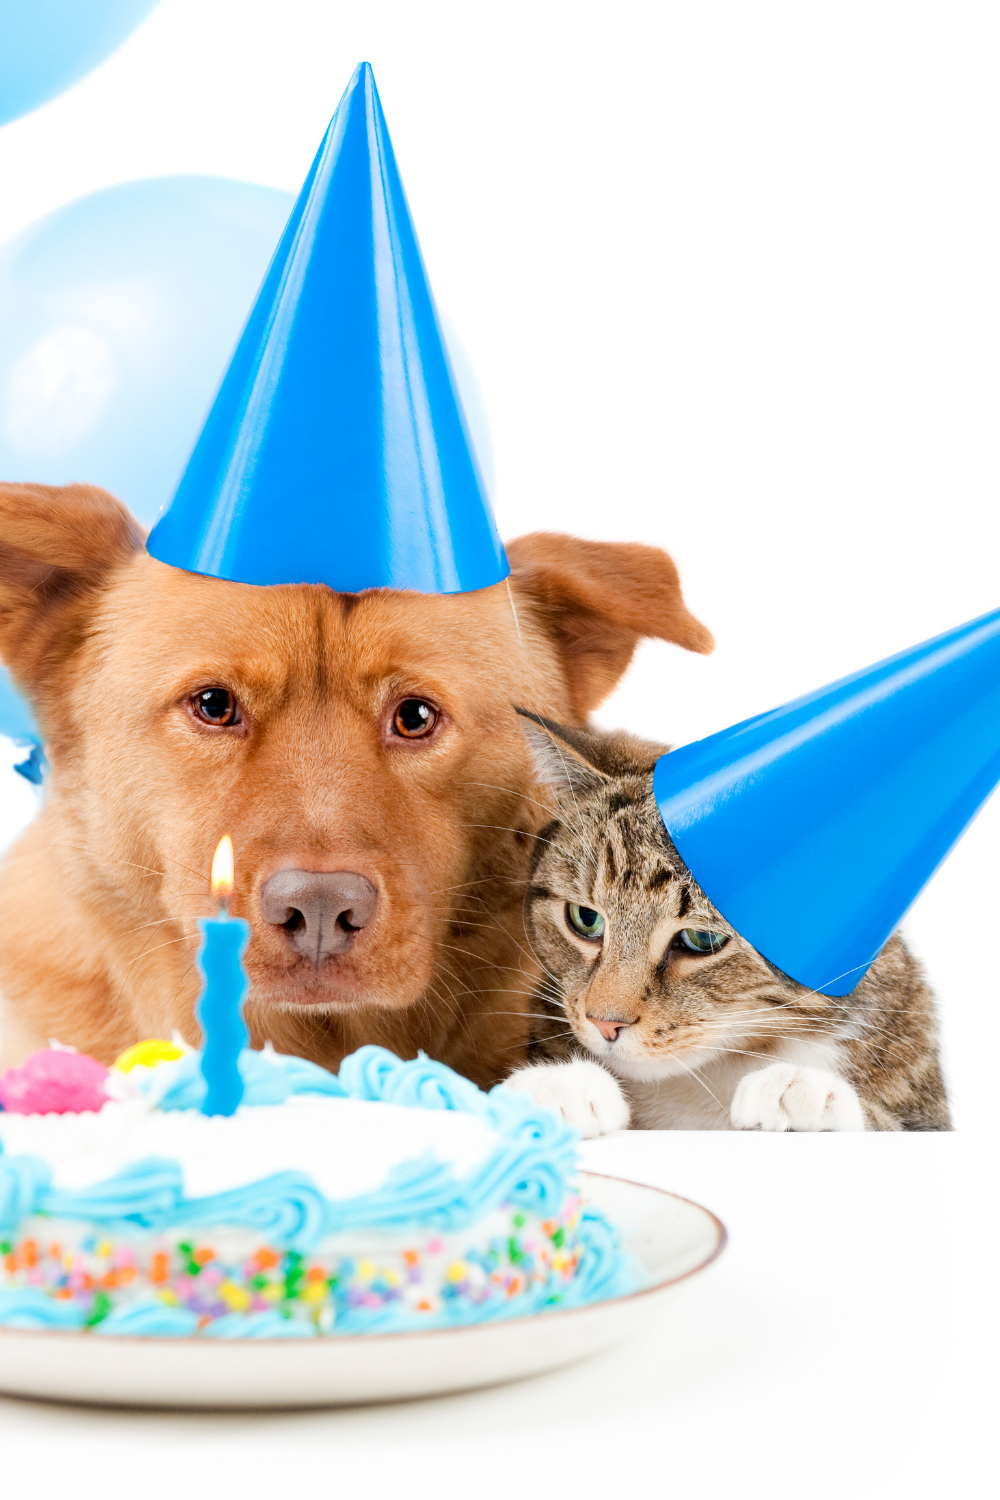 Try These Fun And Quirky Ways To Celebrate Your Pet’s Birthday